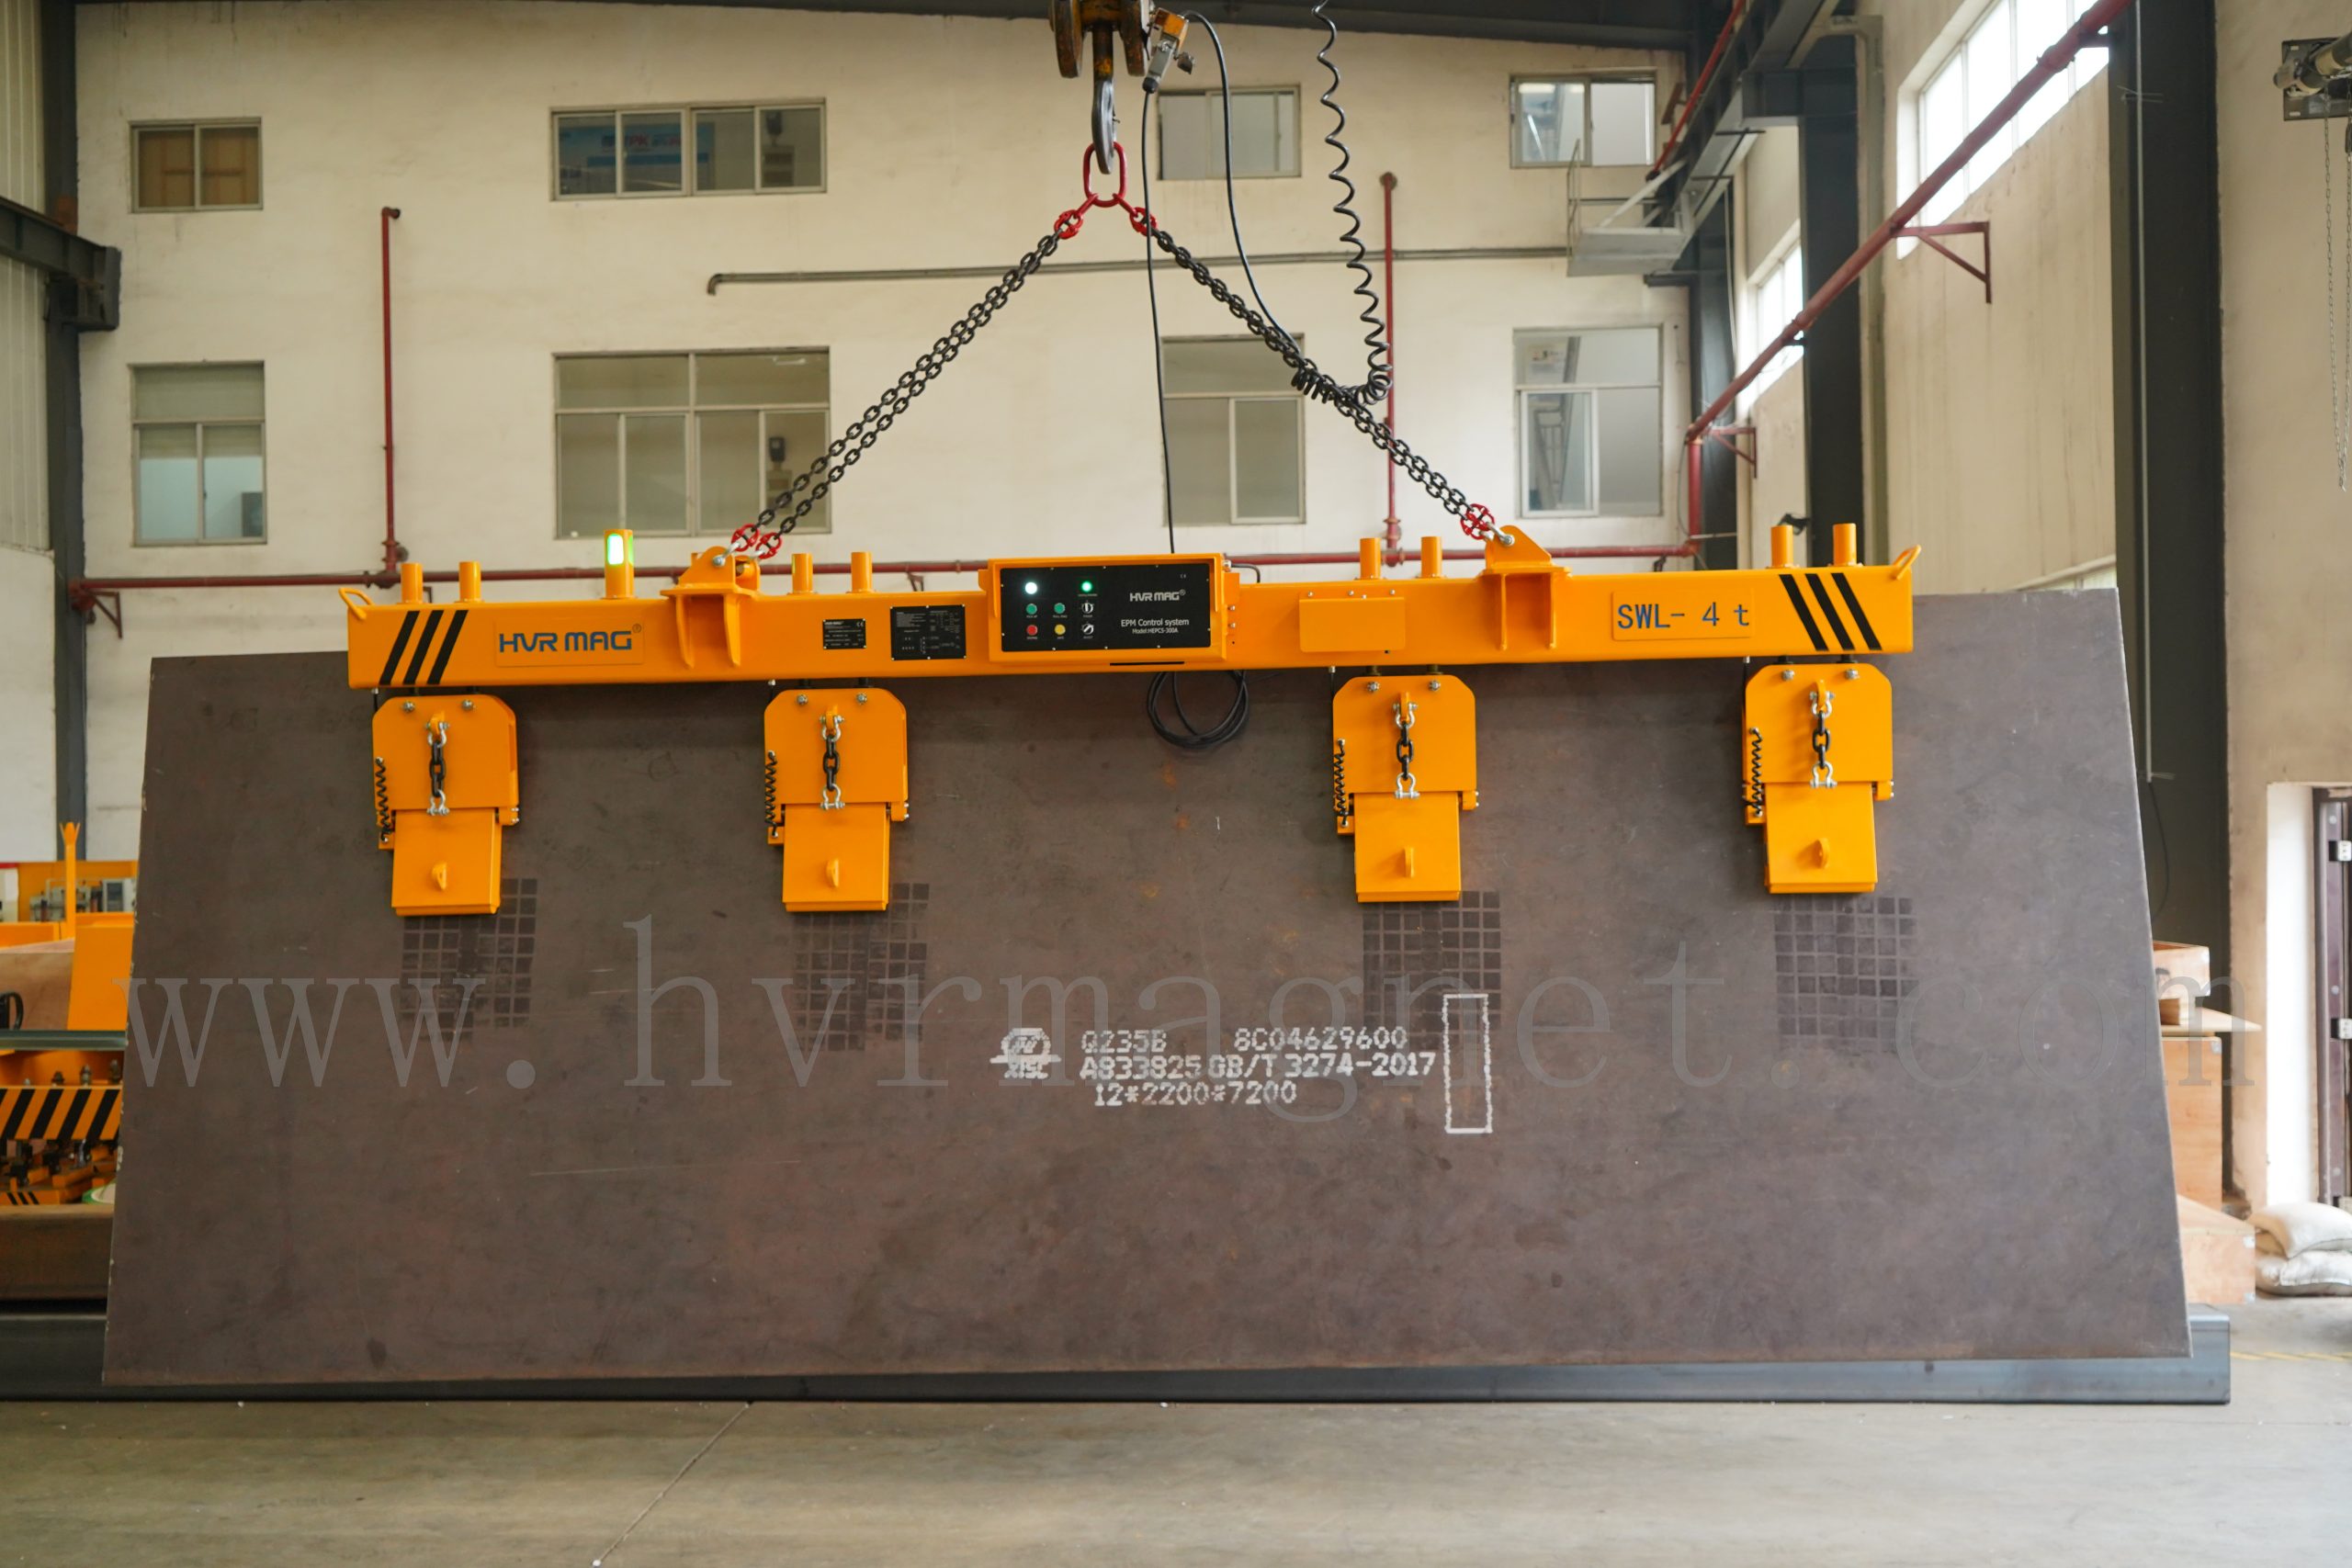 Vertical plate lifting magnets - HVR MAG